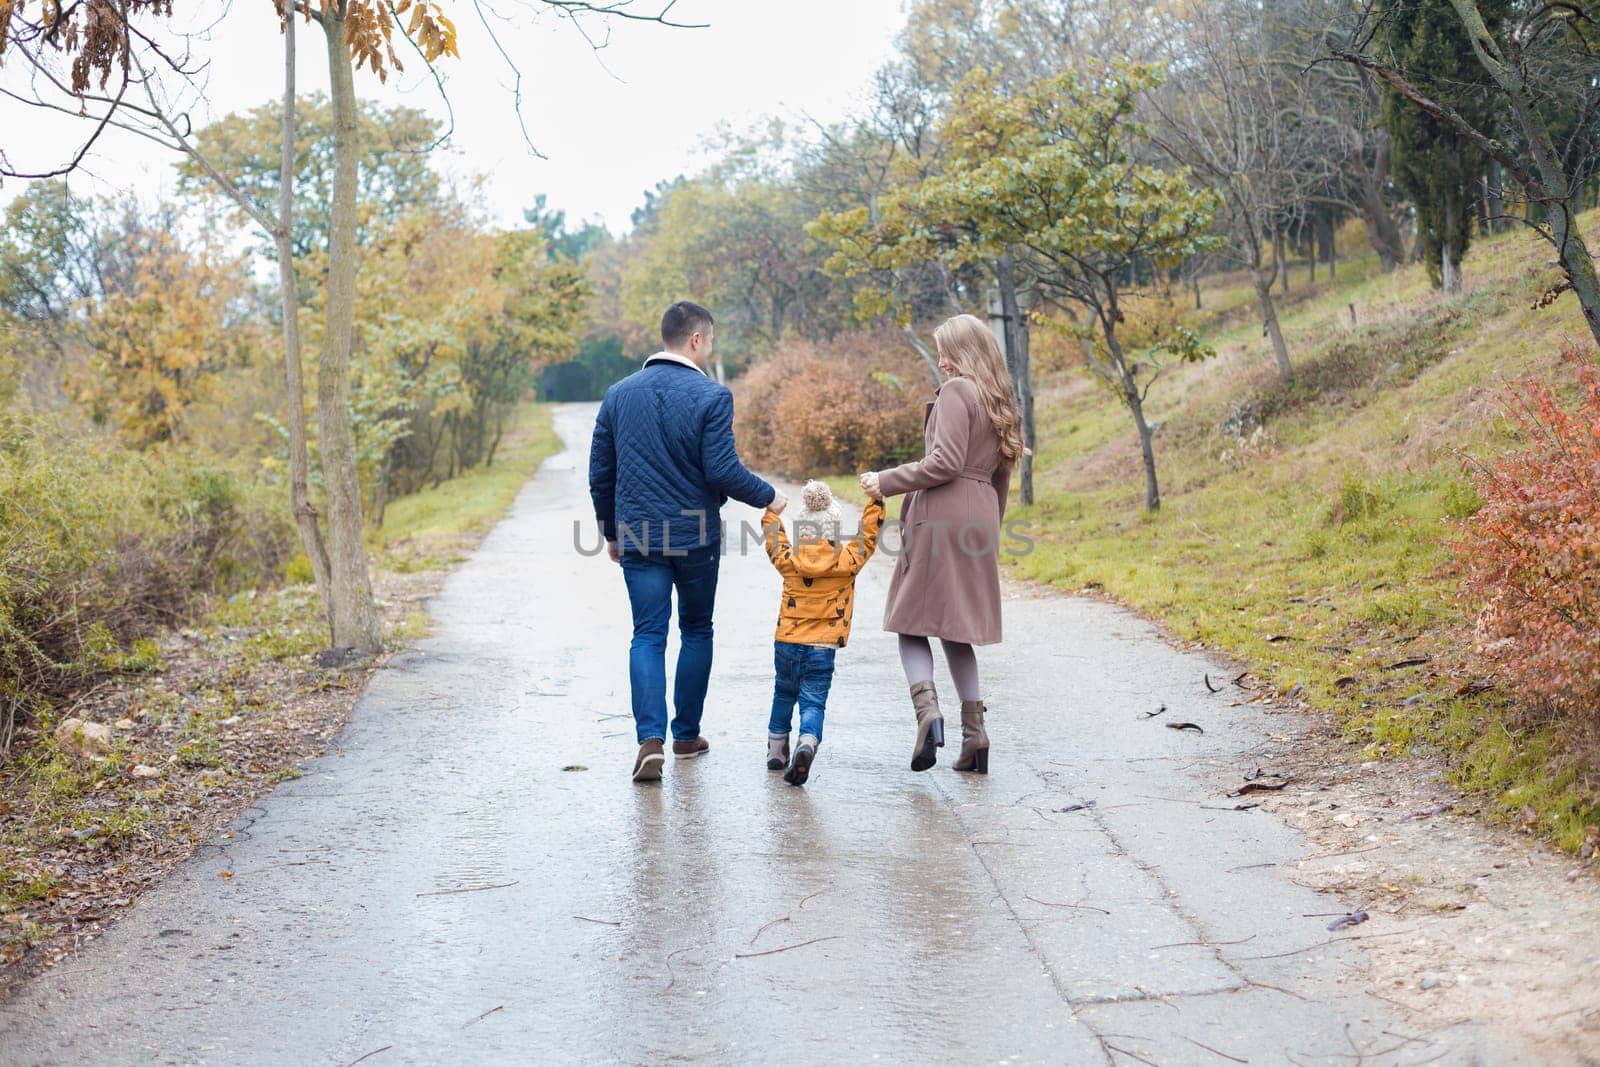 a family with a son go on road in the rain by Simakov